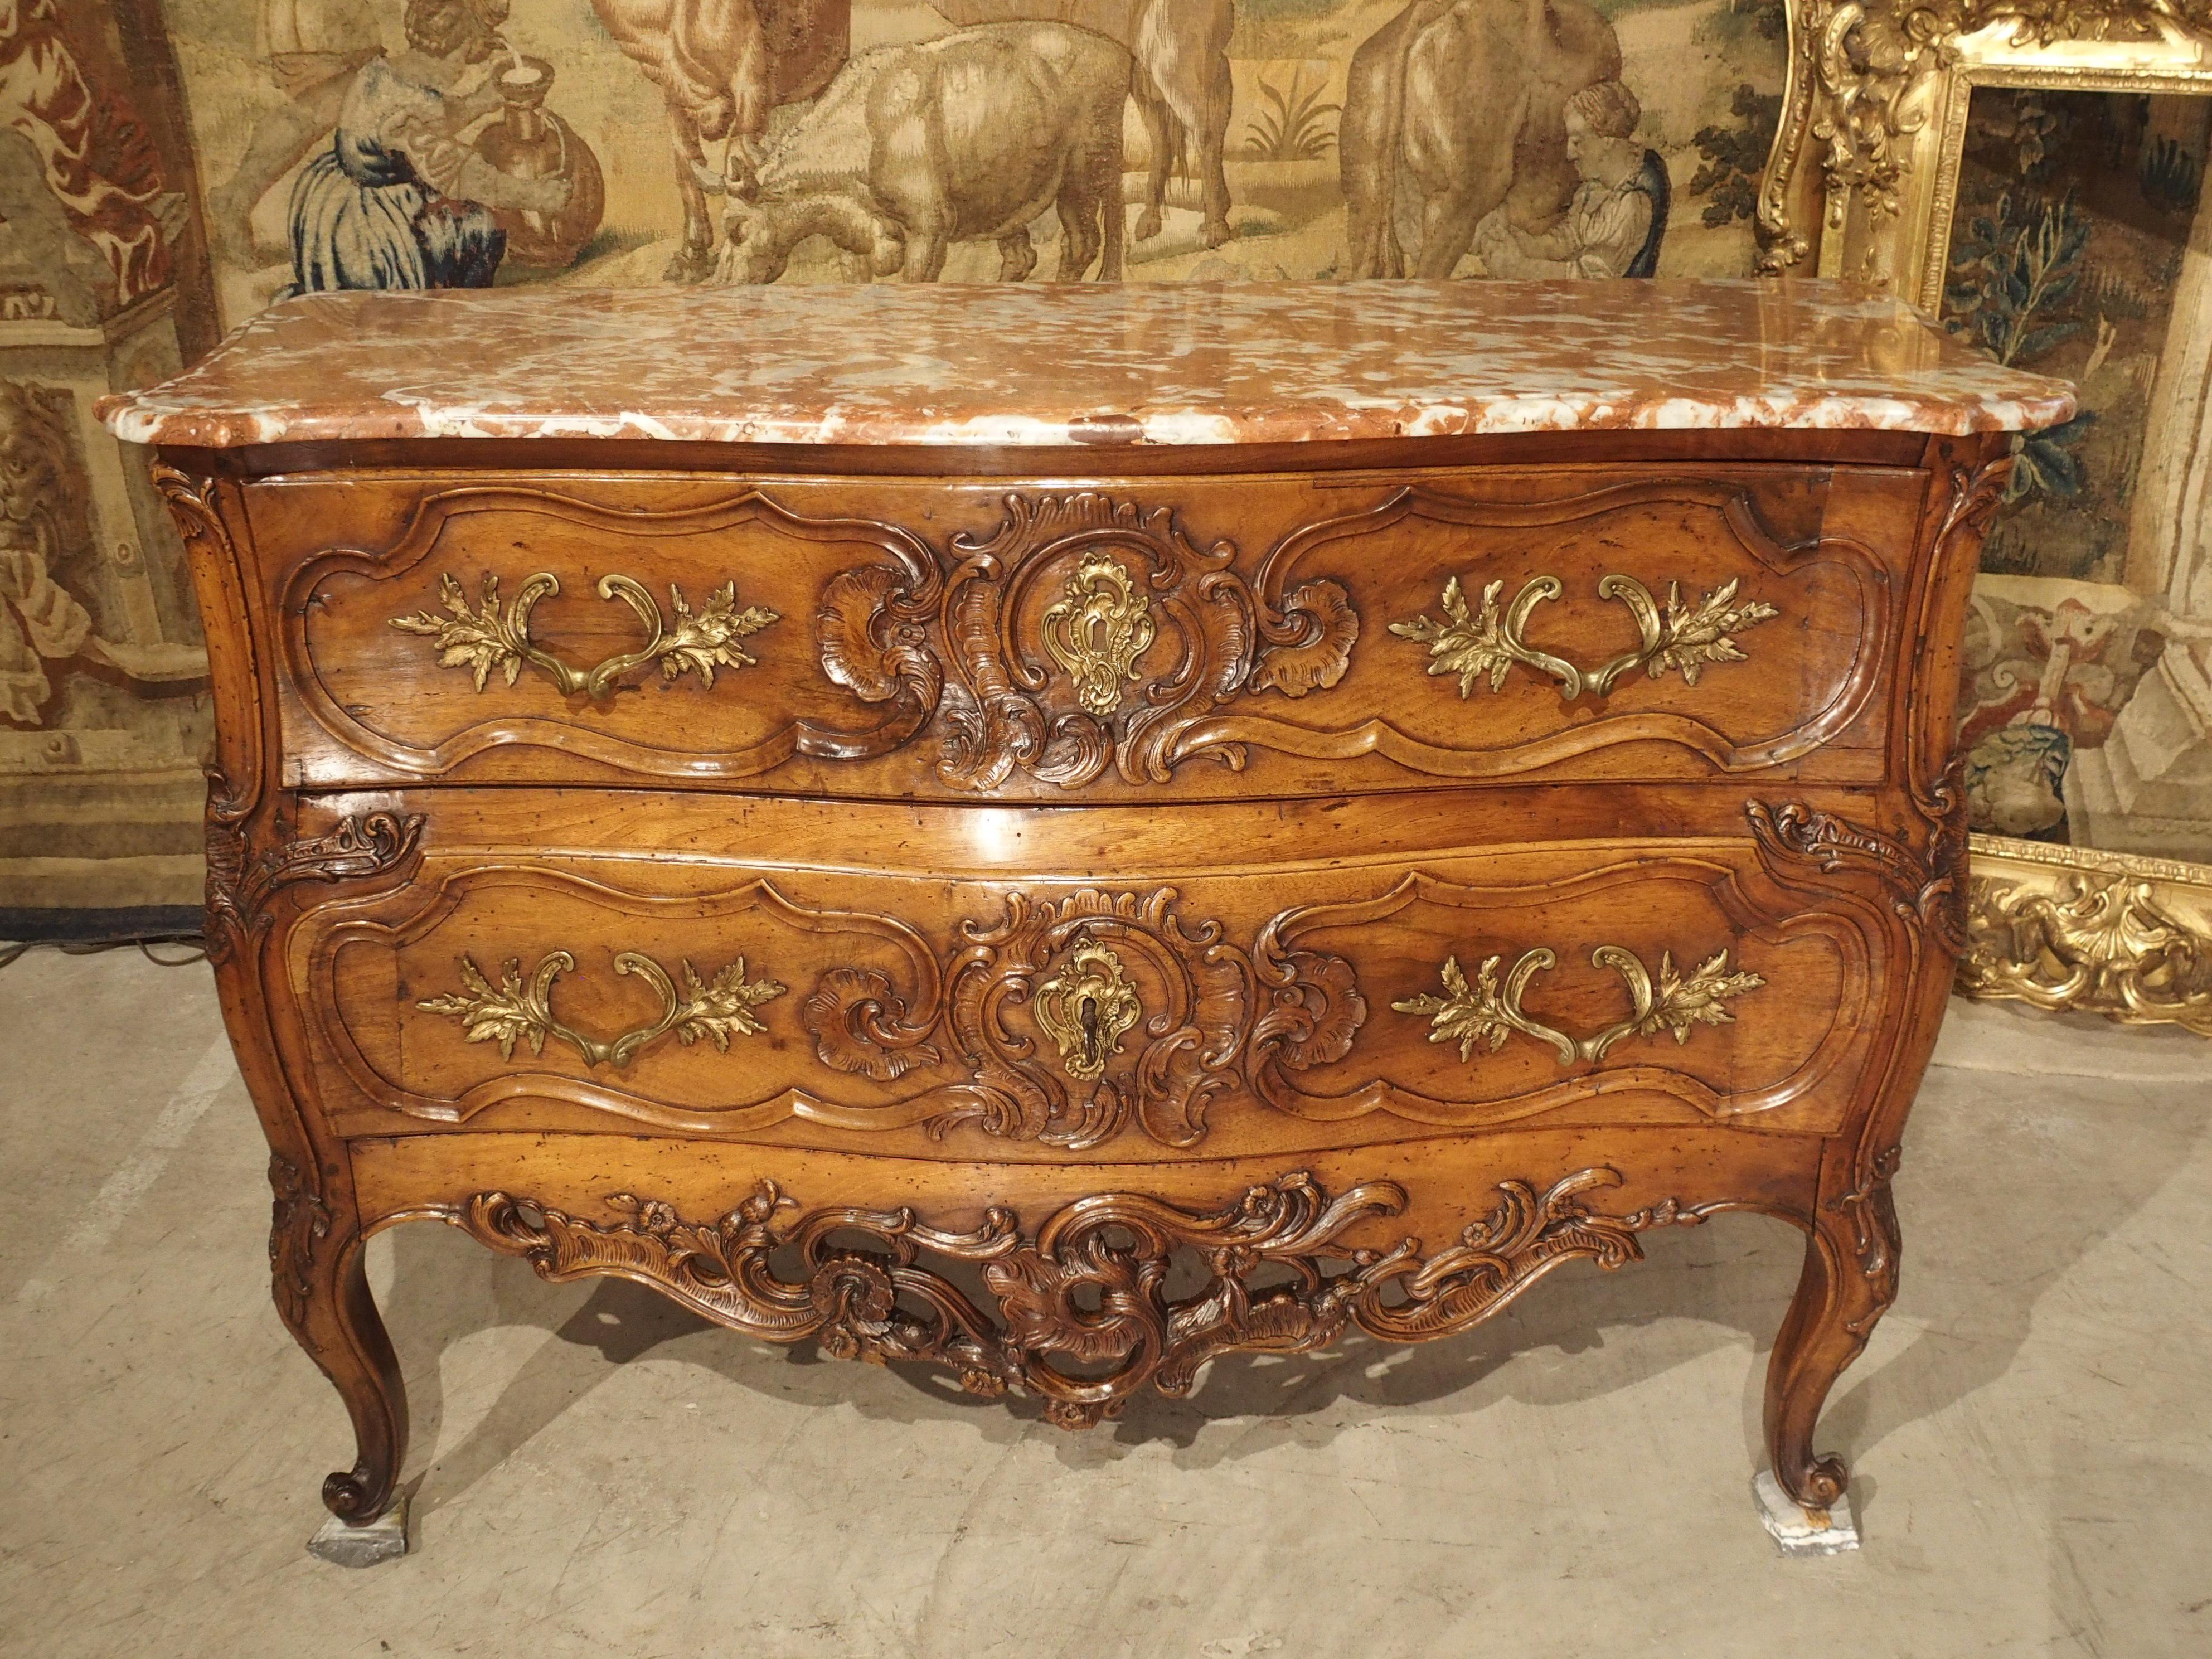 This richly decorated two-drawer commode in walnut wood, is from Nimes, France, and was created, circa 1740. Furniture makers from Nimes and their neighbors in Arles, used the finest materials and paid close attention to line and form. Commodes, or